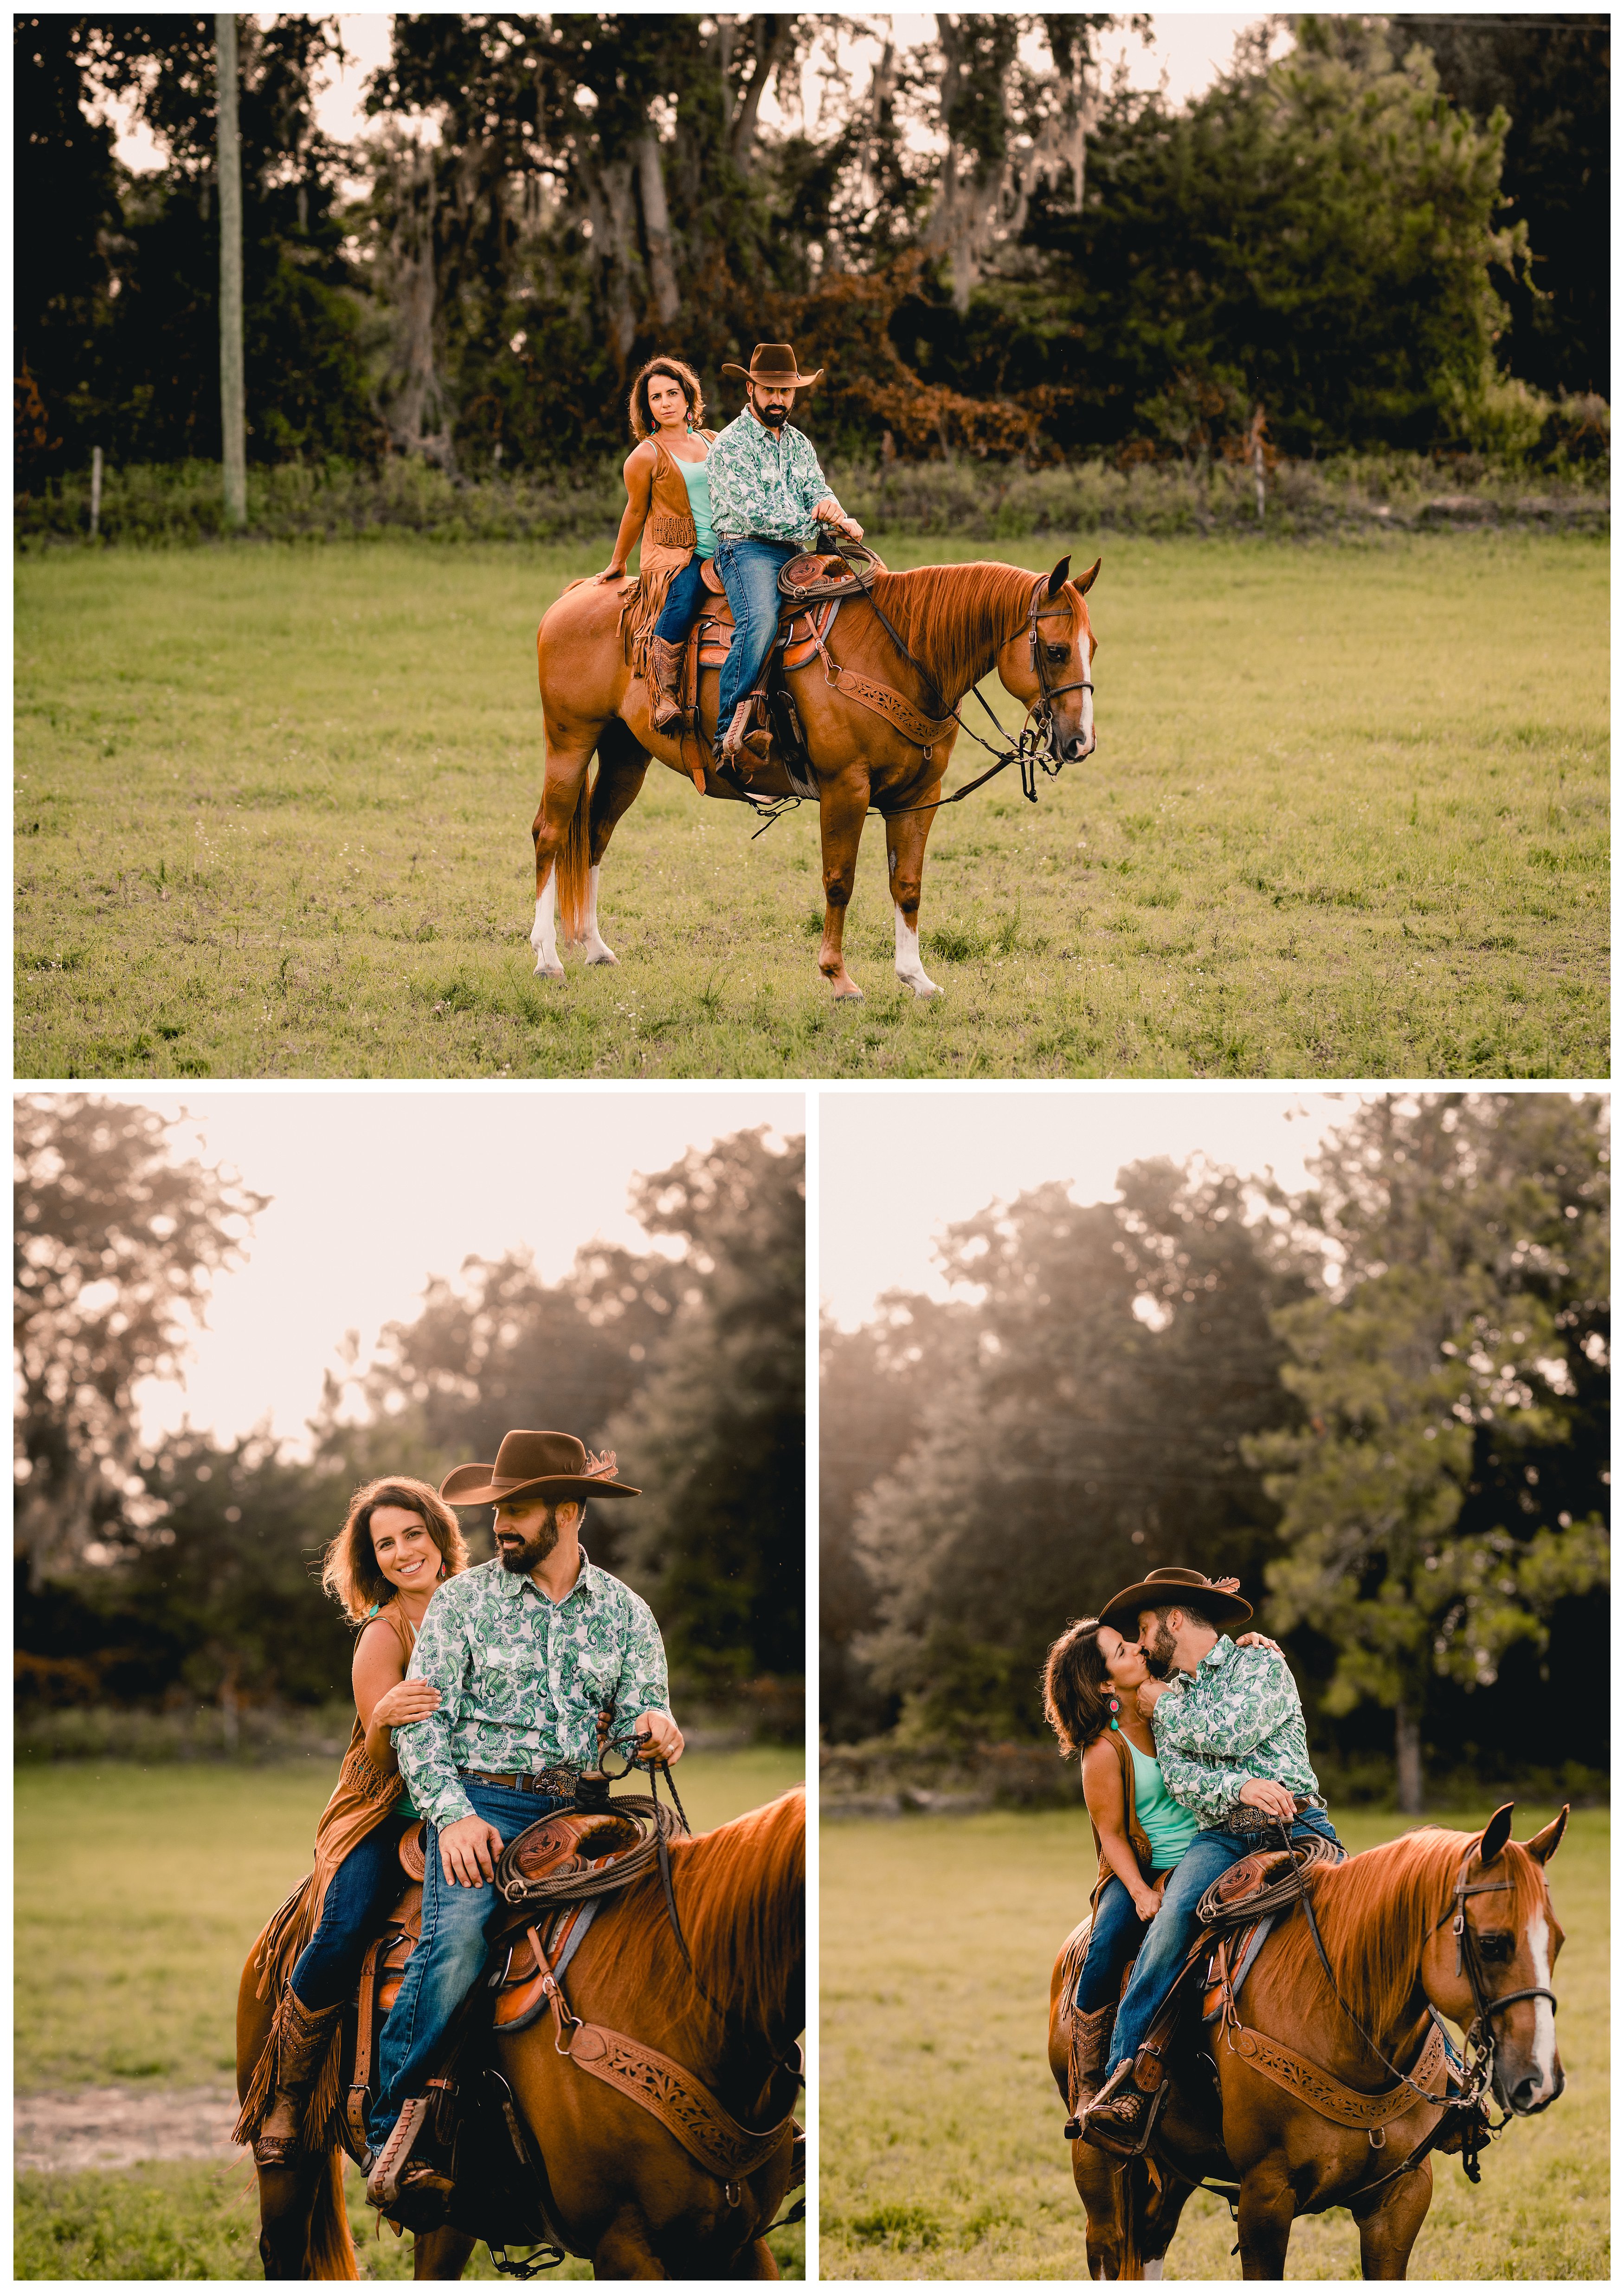 Western photography of couple riding double on a roping horse during the sunset in Gainesville, FL.